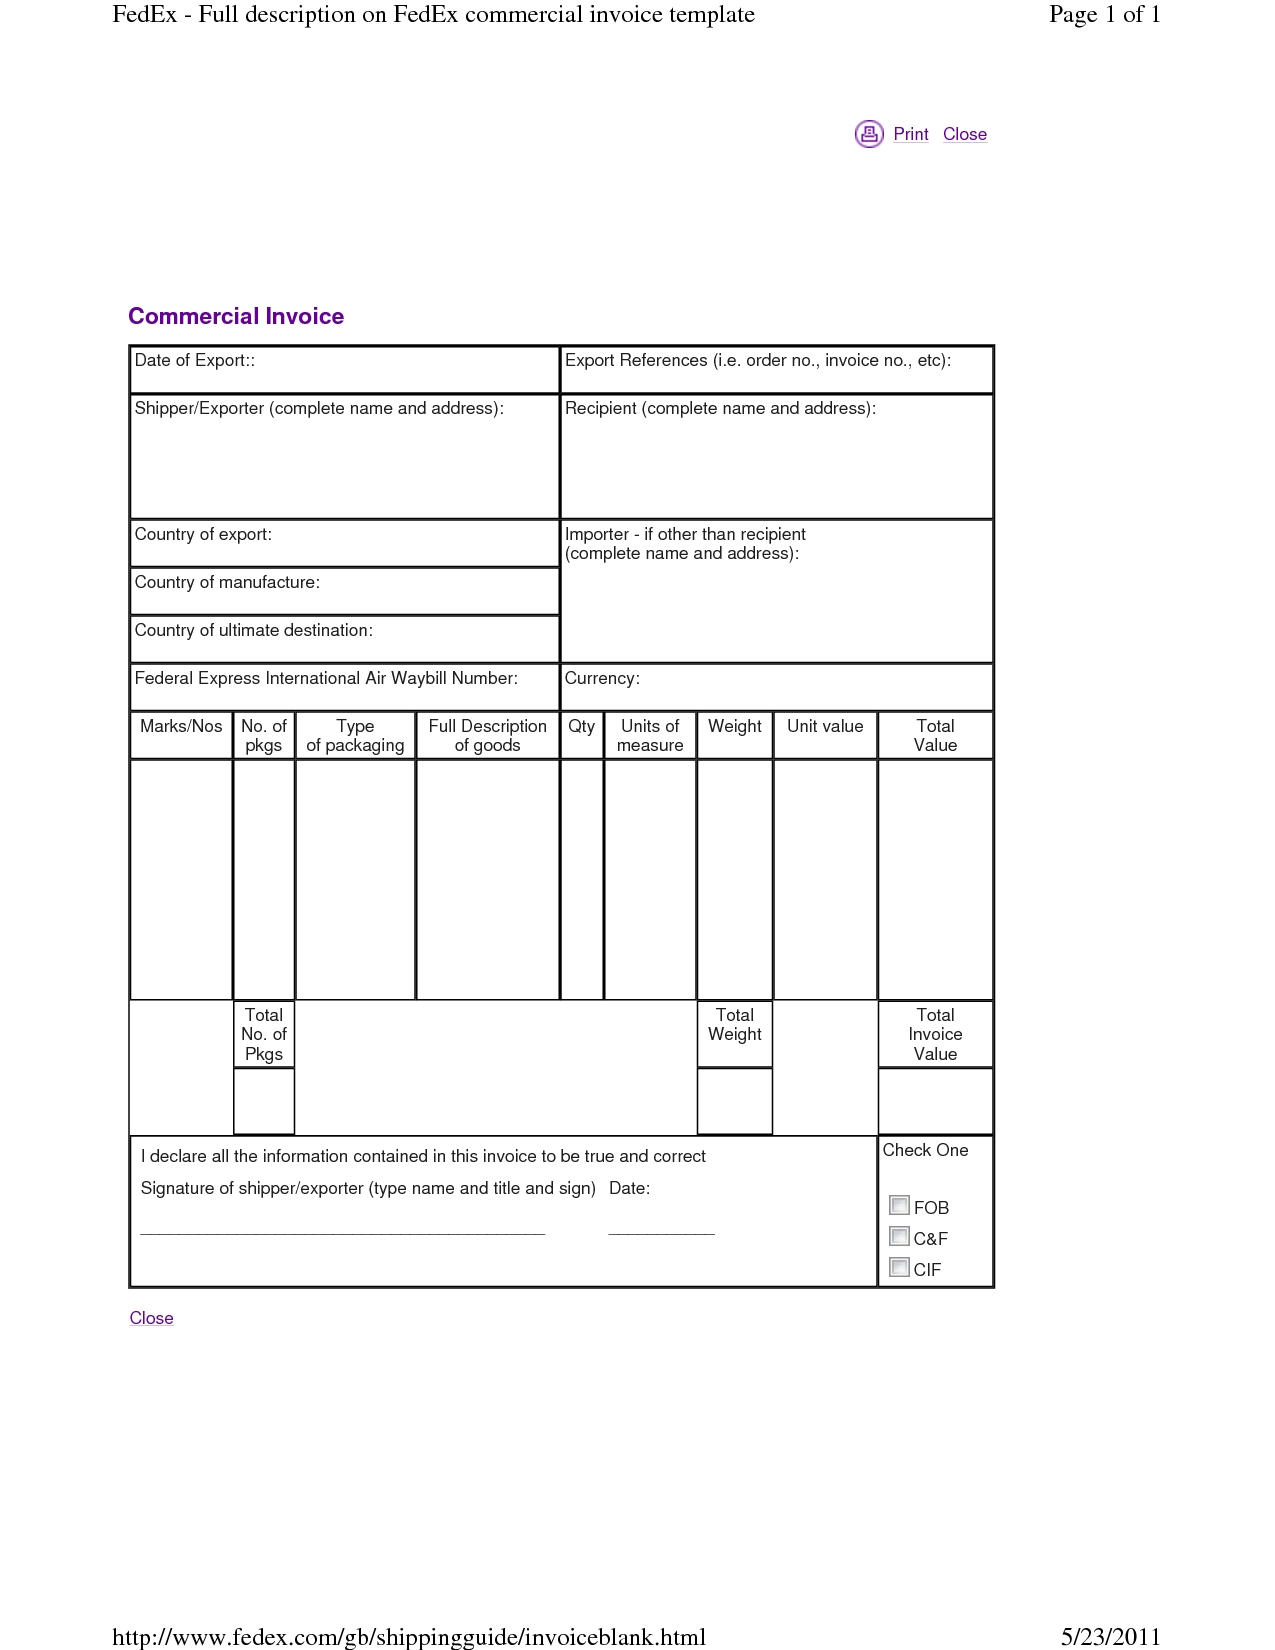 fedex commercial invoice blank